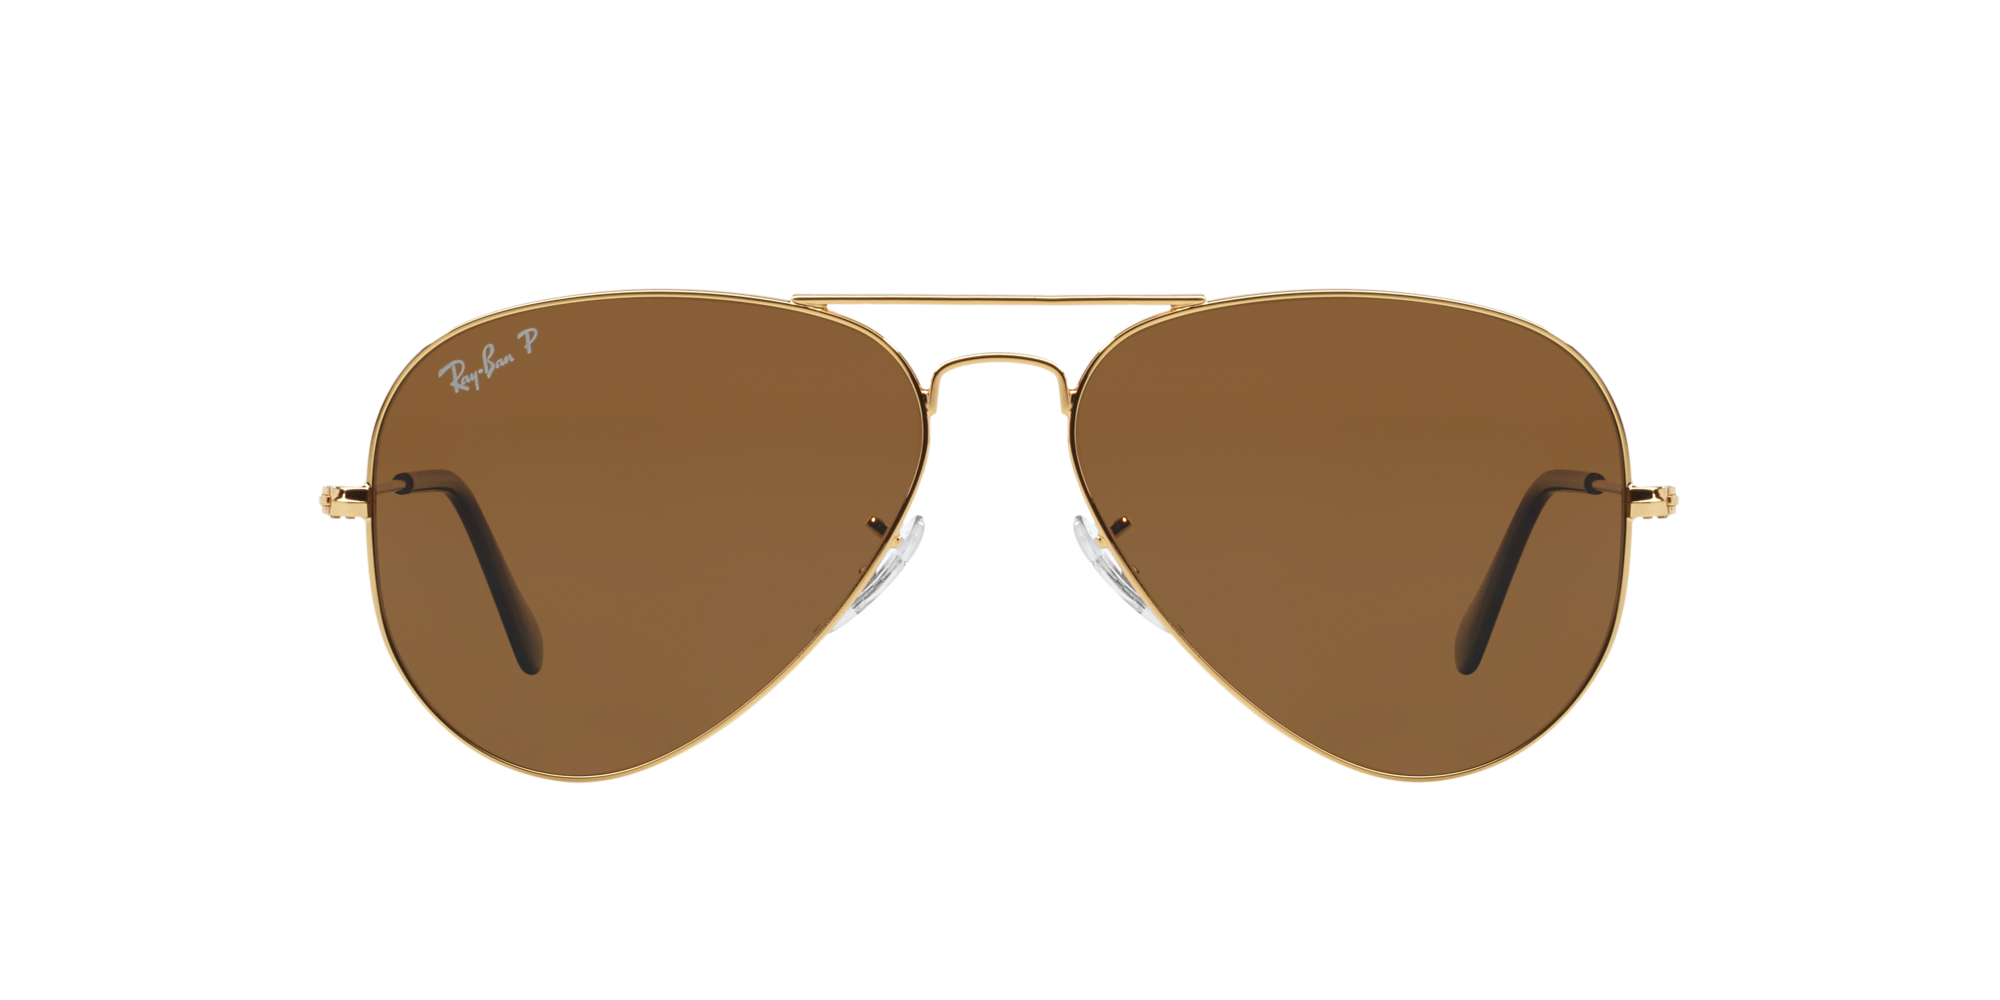 Ray Ban RB3025 001/57 Gold/ Polarized Brown Aviator